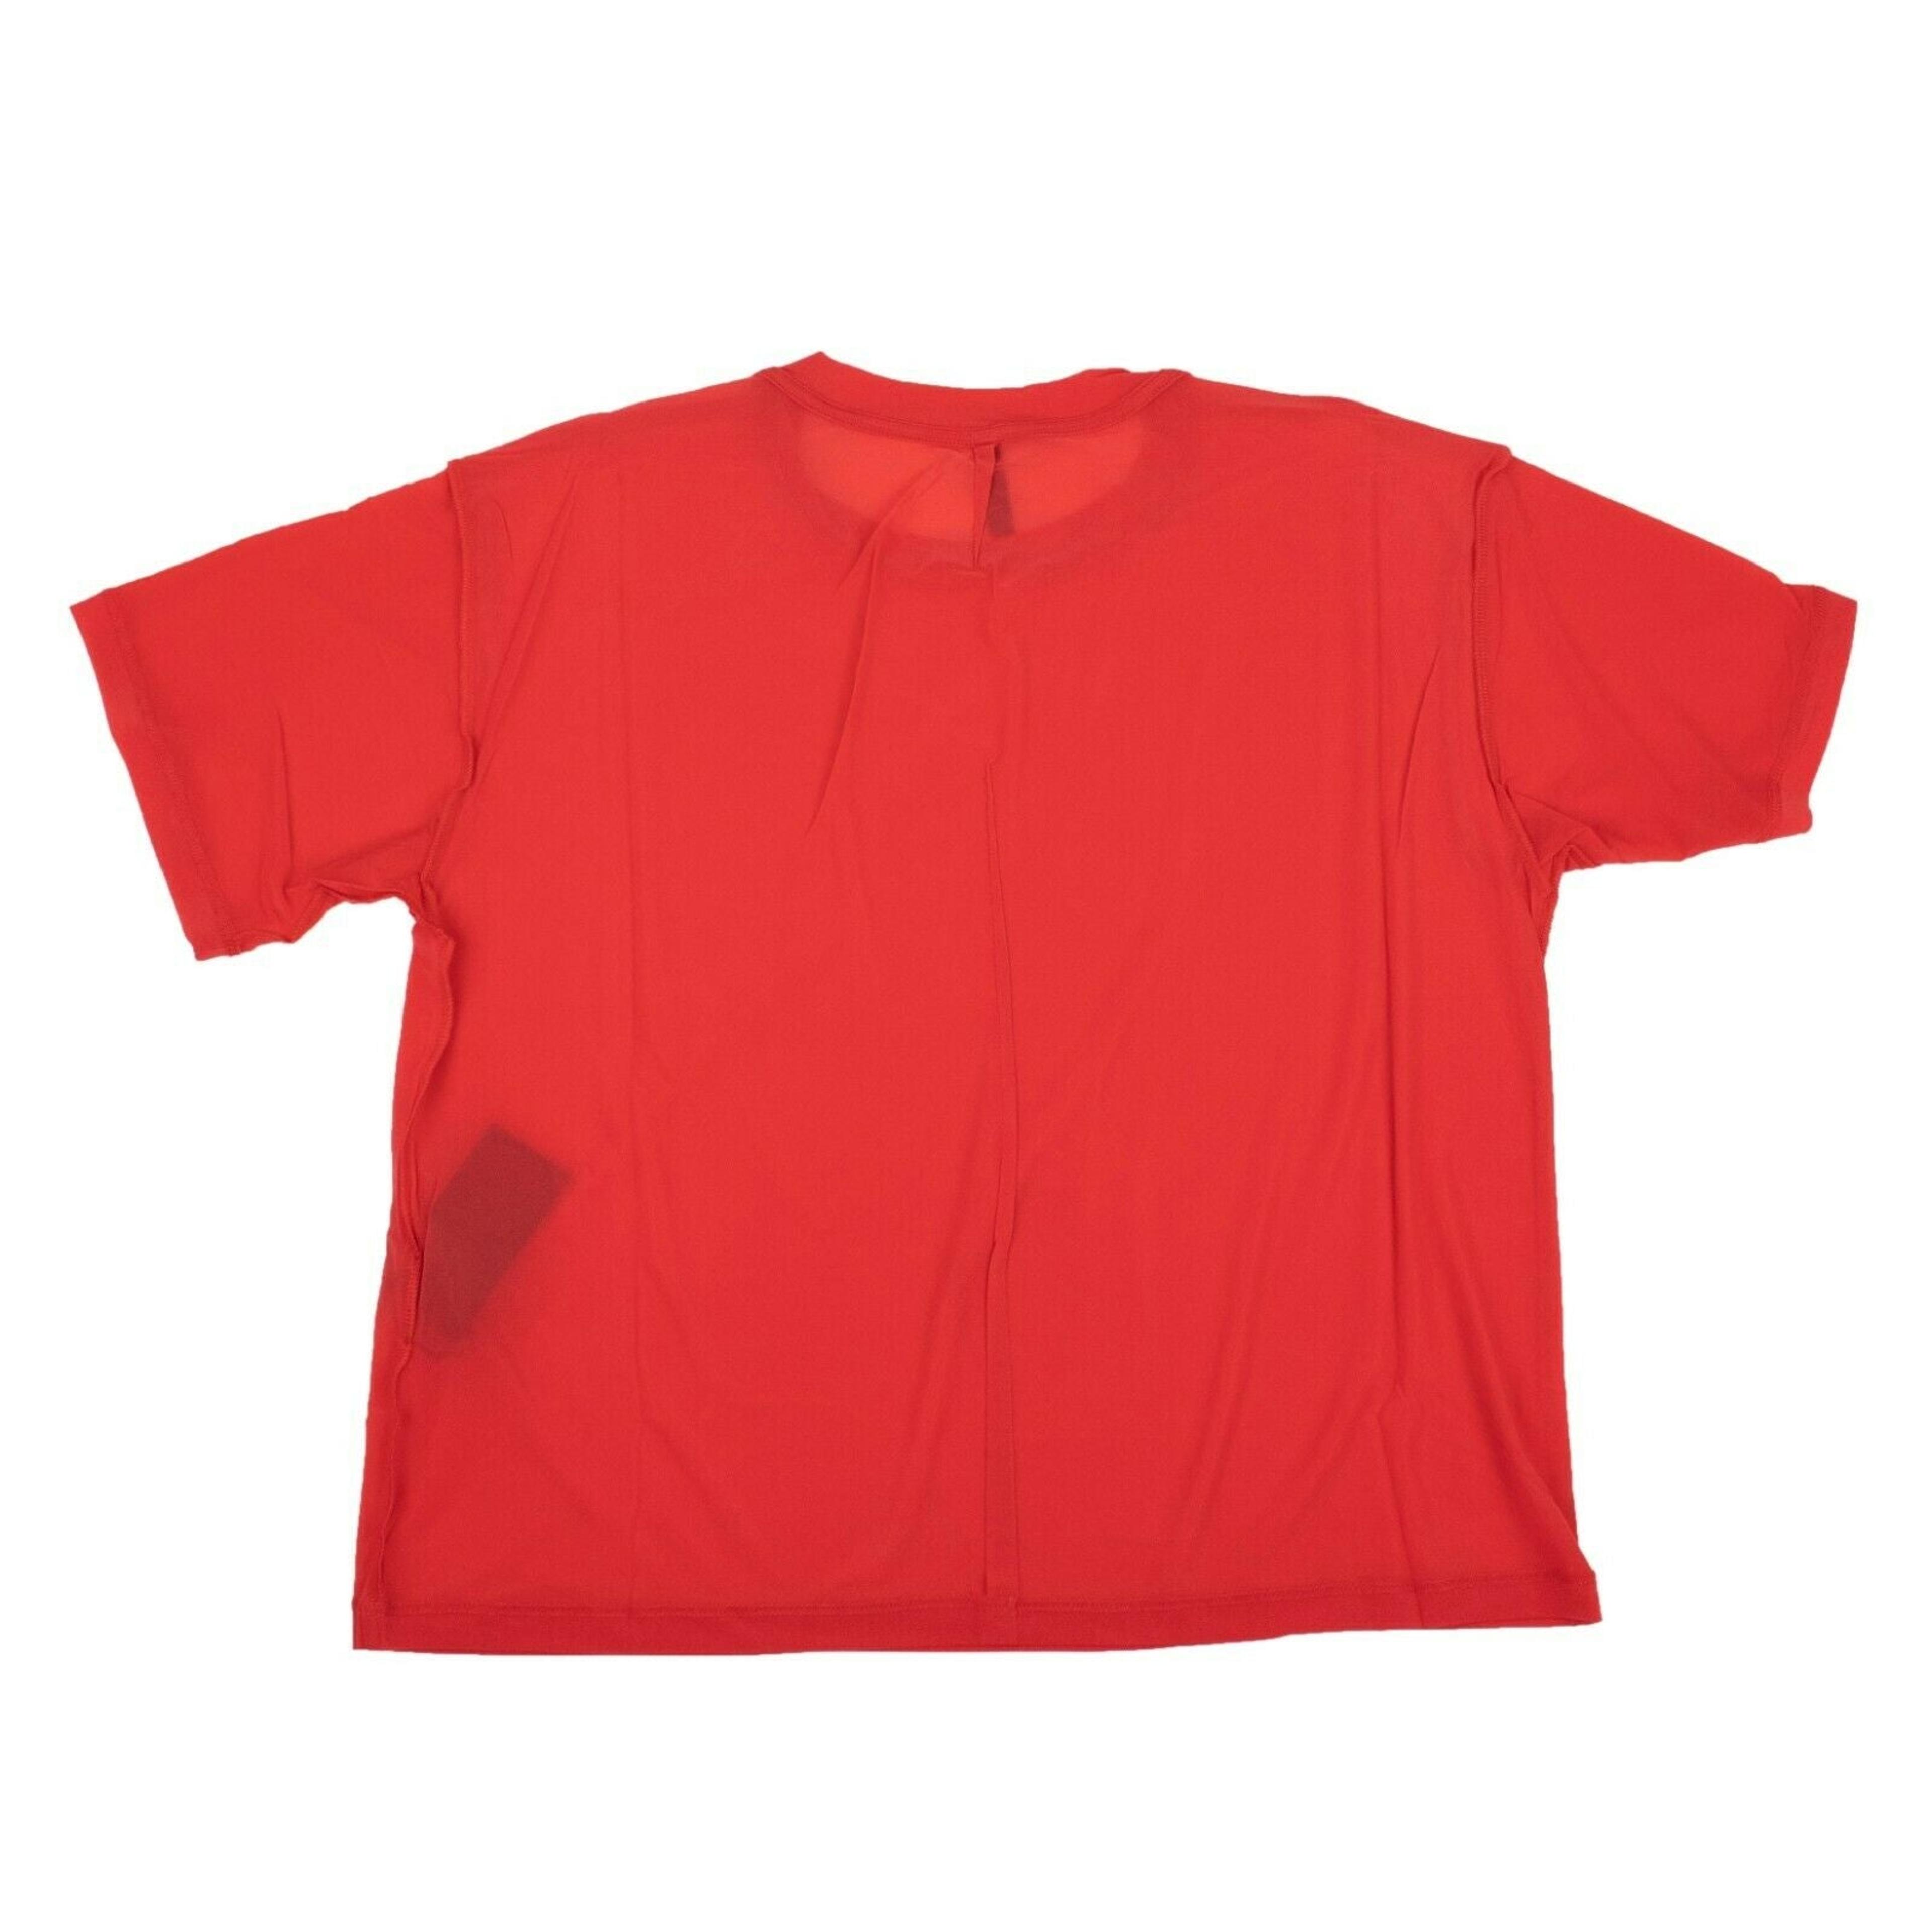 Alternate View 1 of Unravel Project Stocking Reverse Skate T-Shirt - Red